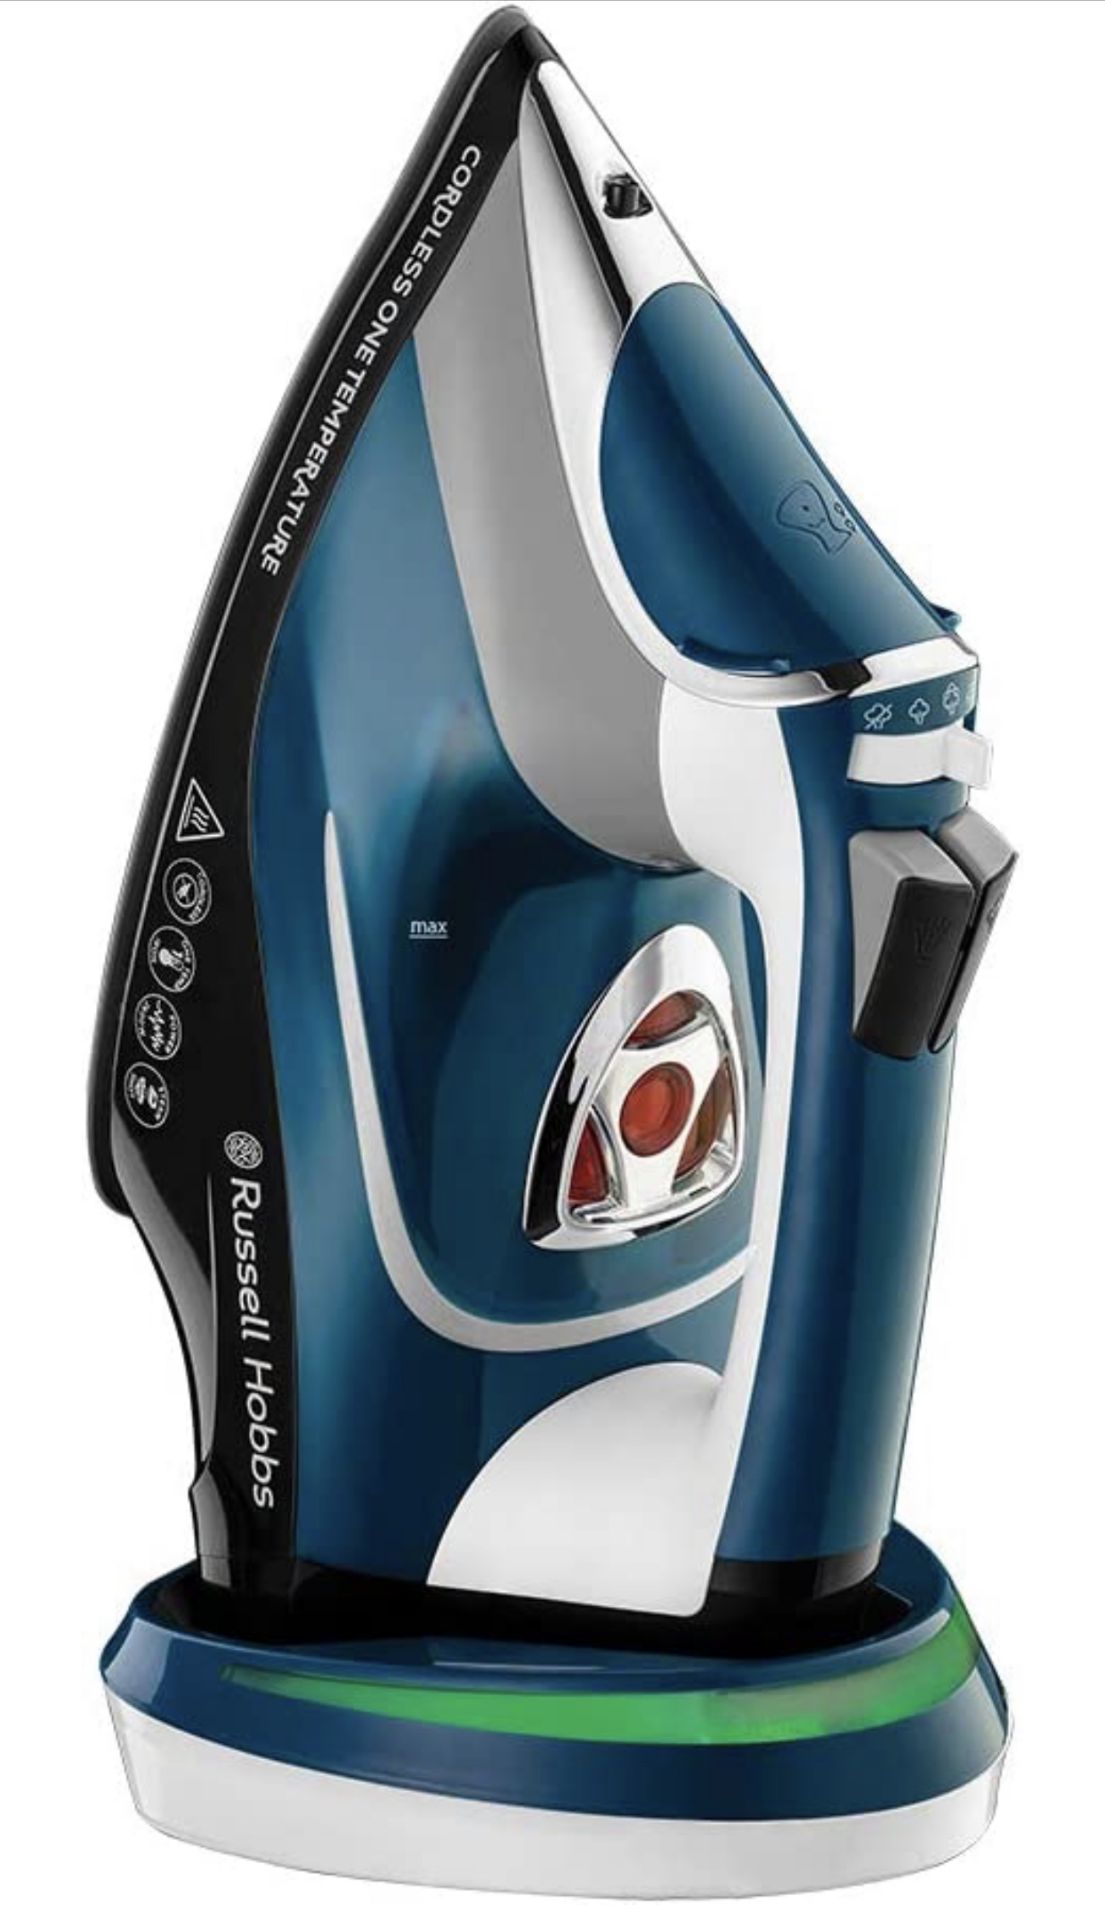 RRP £49.99 Russell Hobbs 26020 Cordless One-Temperature Steam Iron 2600W